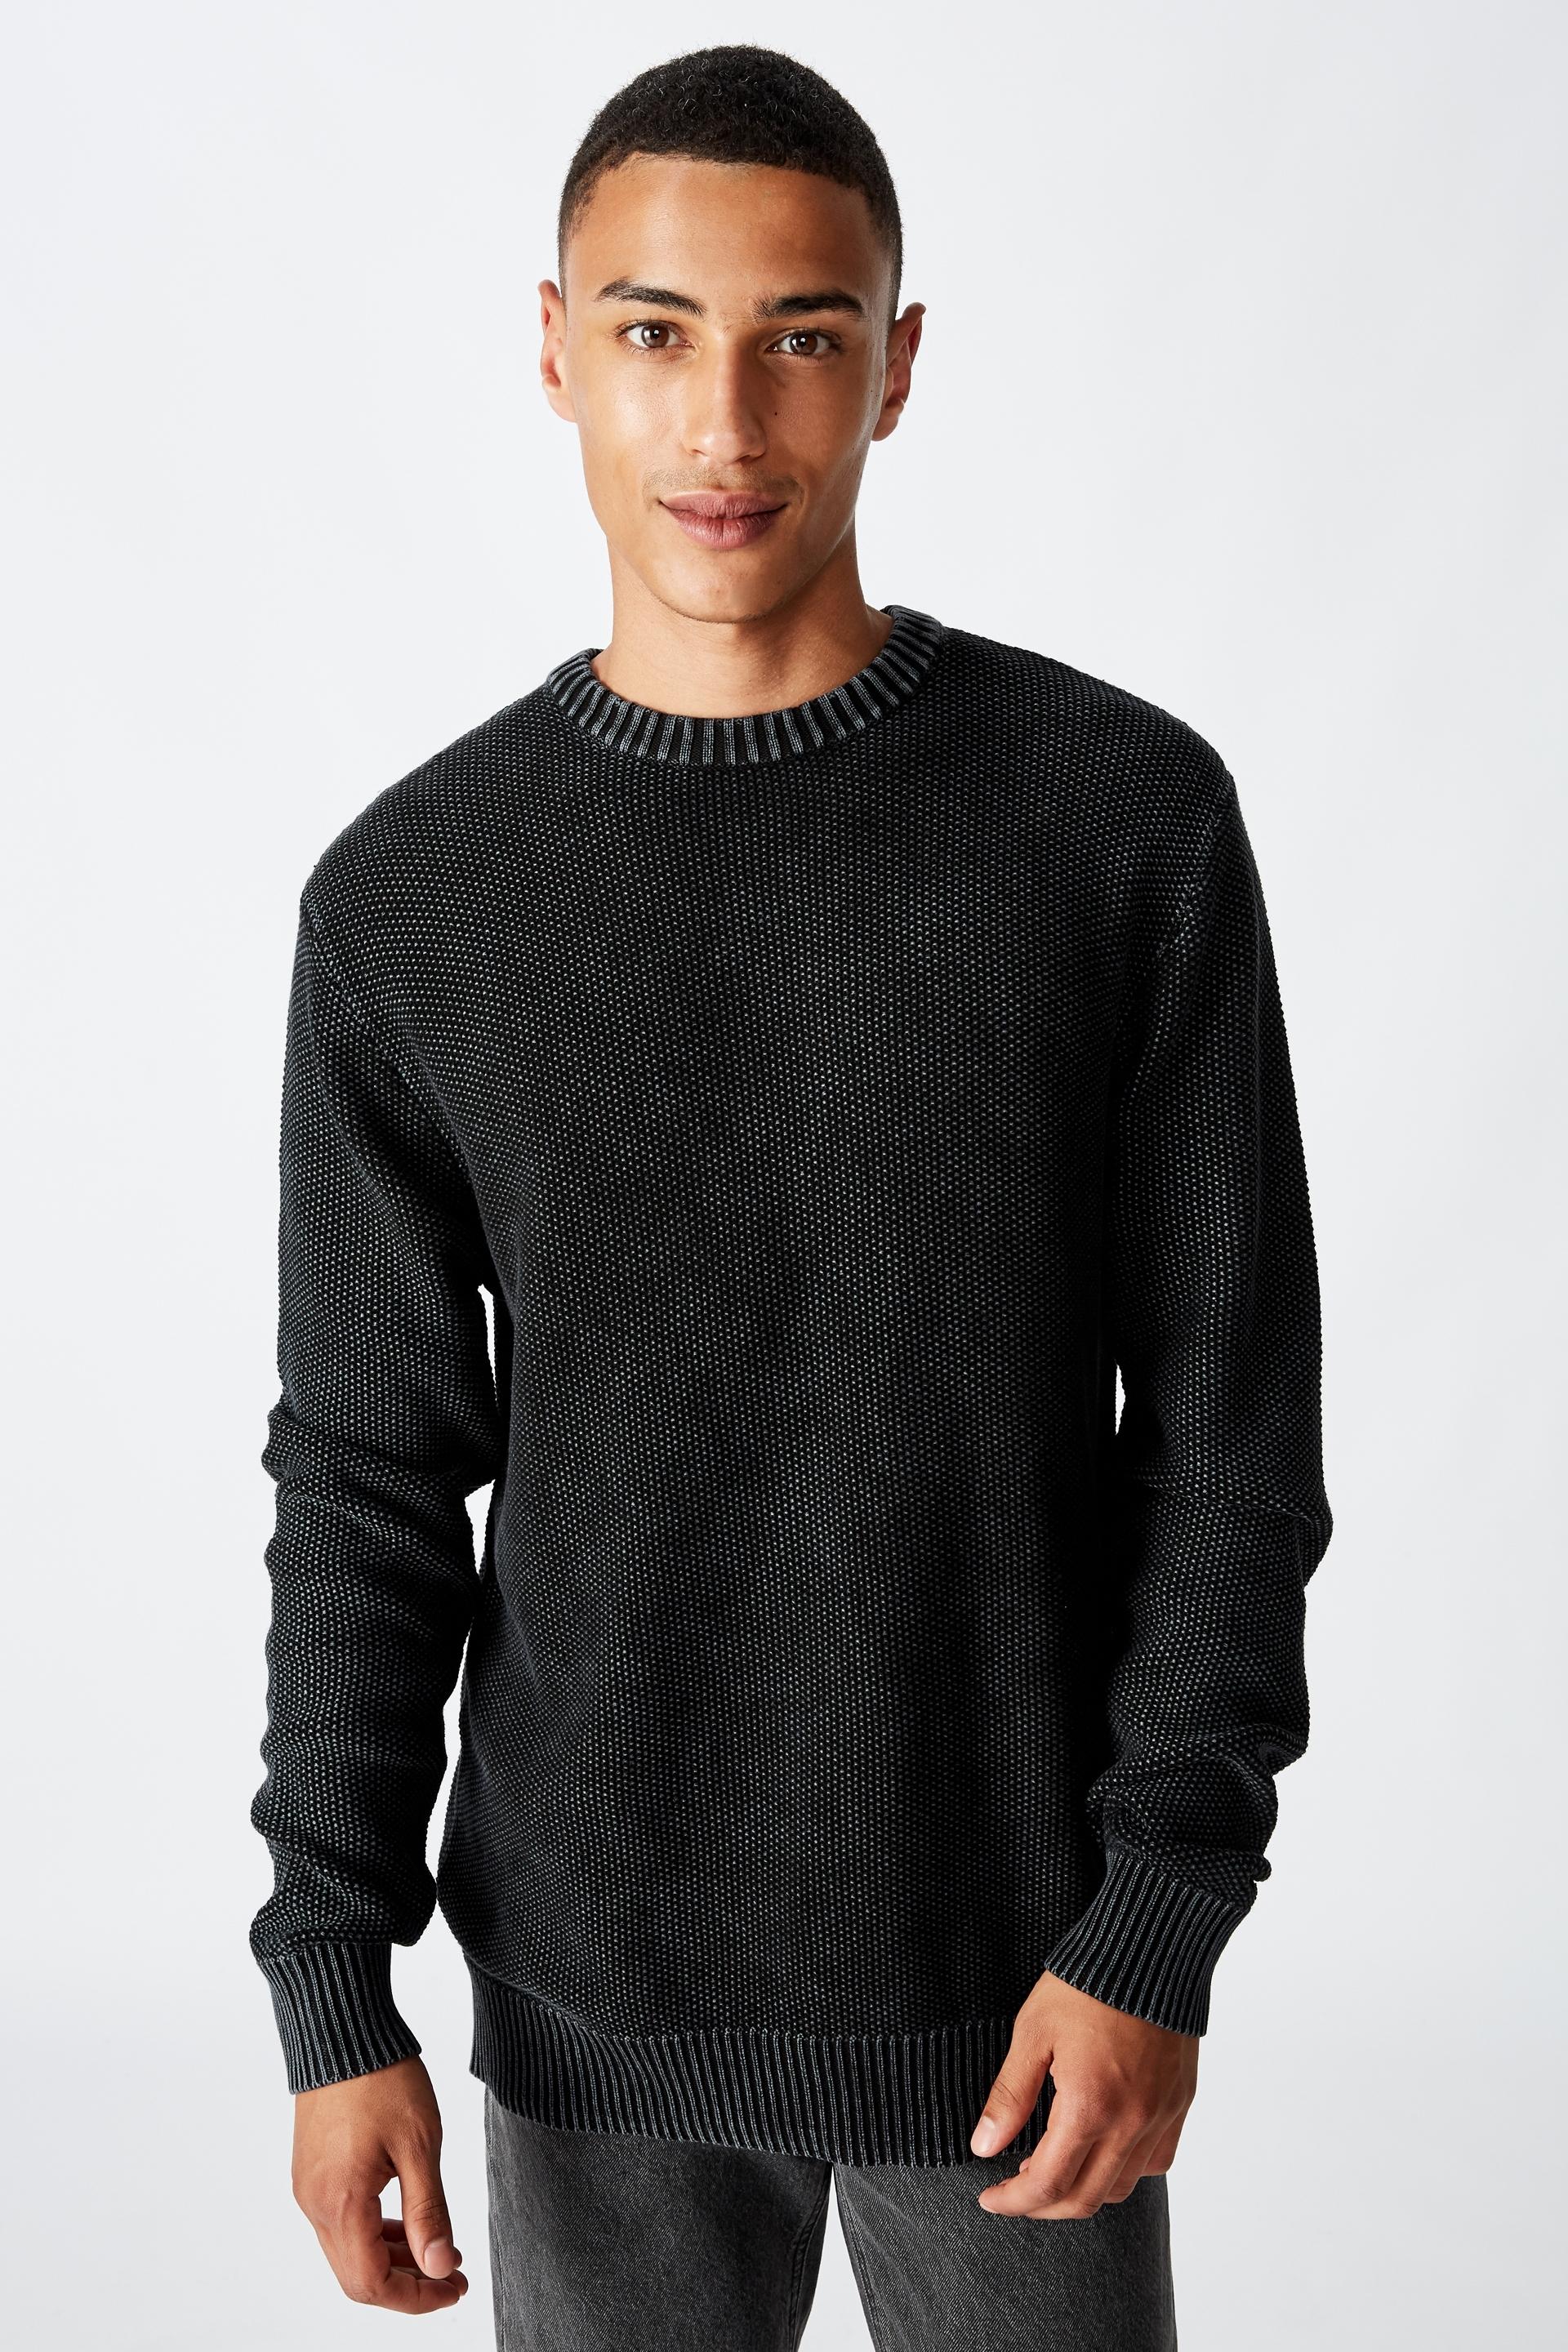 Crew knit - washed black Cotton On Knitwear | Superbalist.com